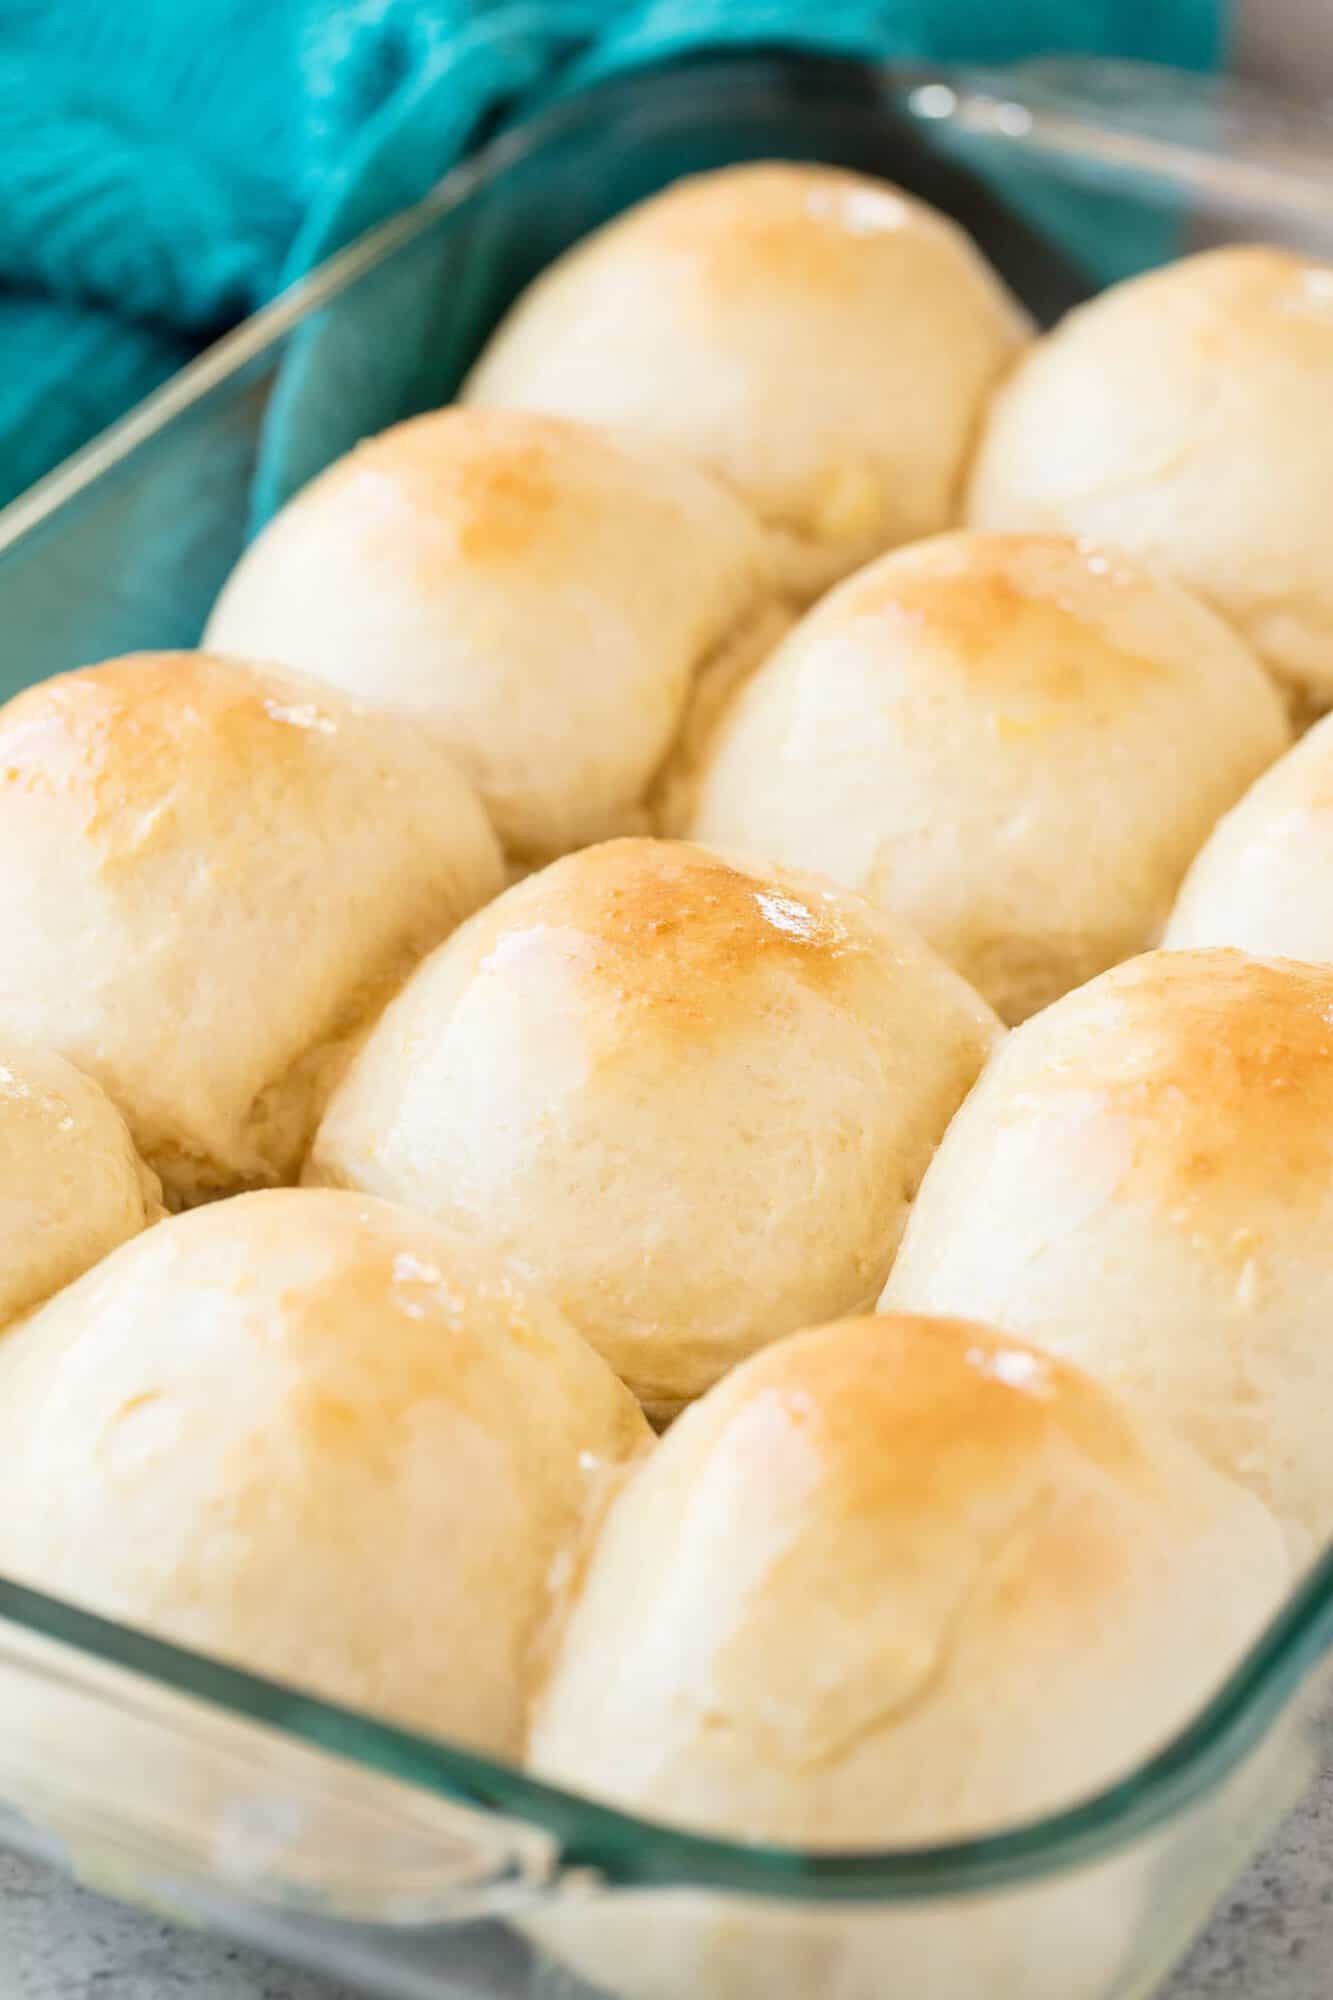 Learn how to make Homemade Hawaiian Sweet Rolls that are soft, fluffy, and totally easy to make. These sweet rolls will be an instant family favorite!